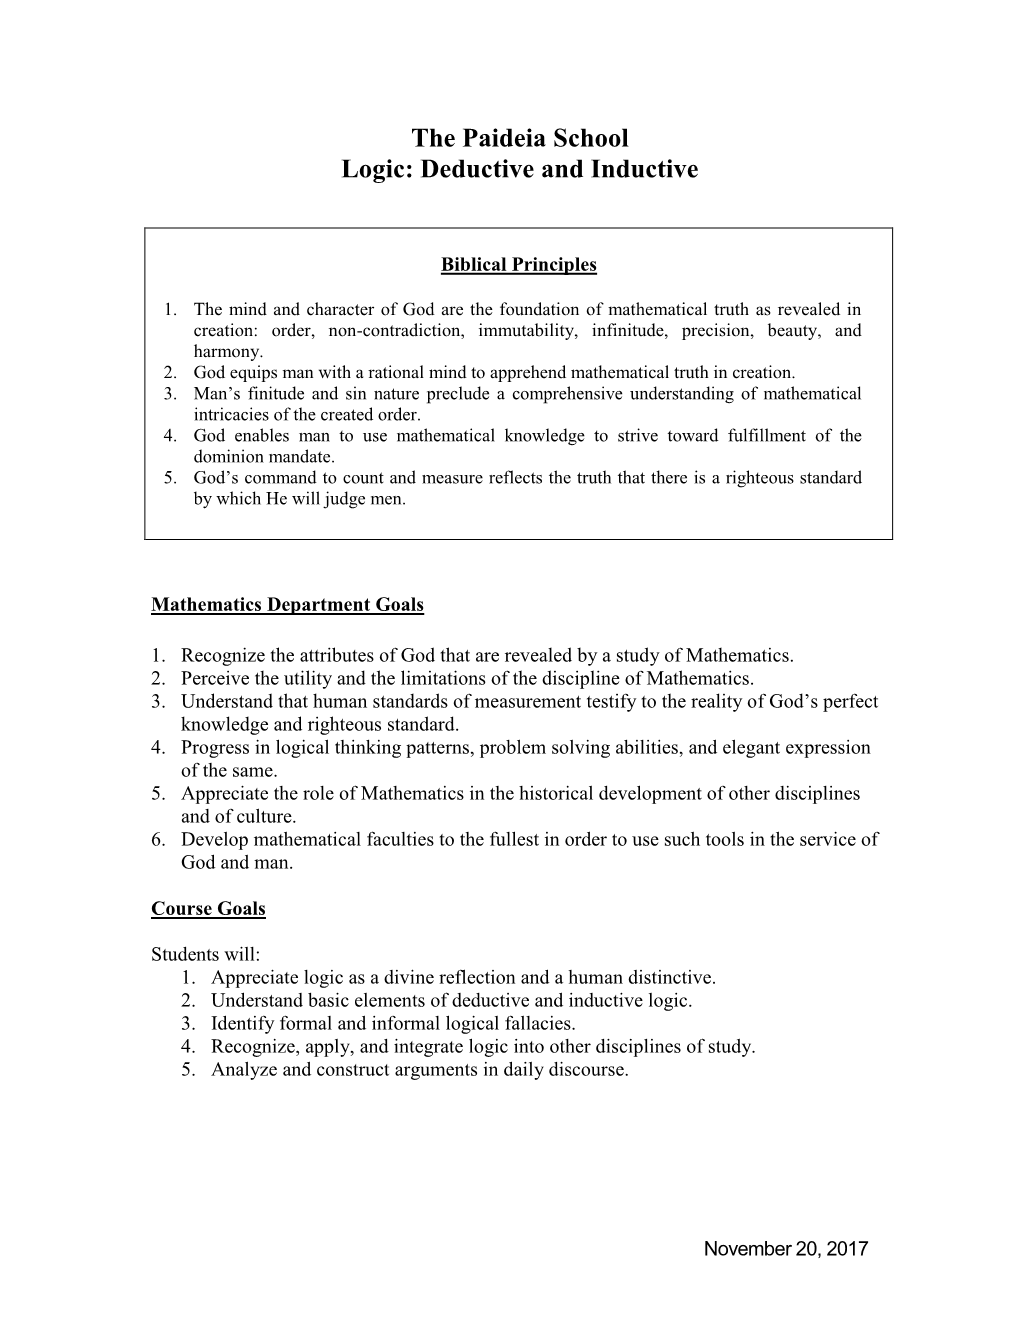 The Paideia School Logic: Deductive and Inductive